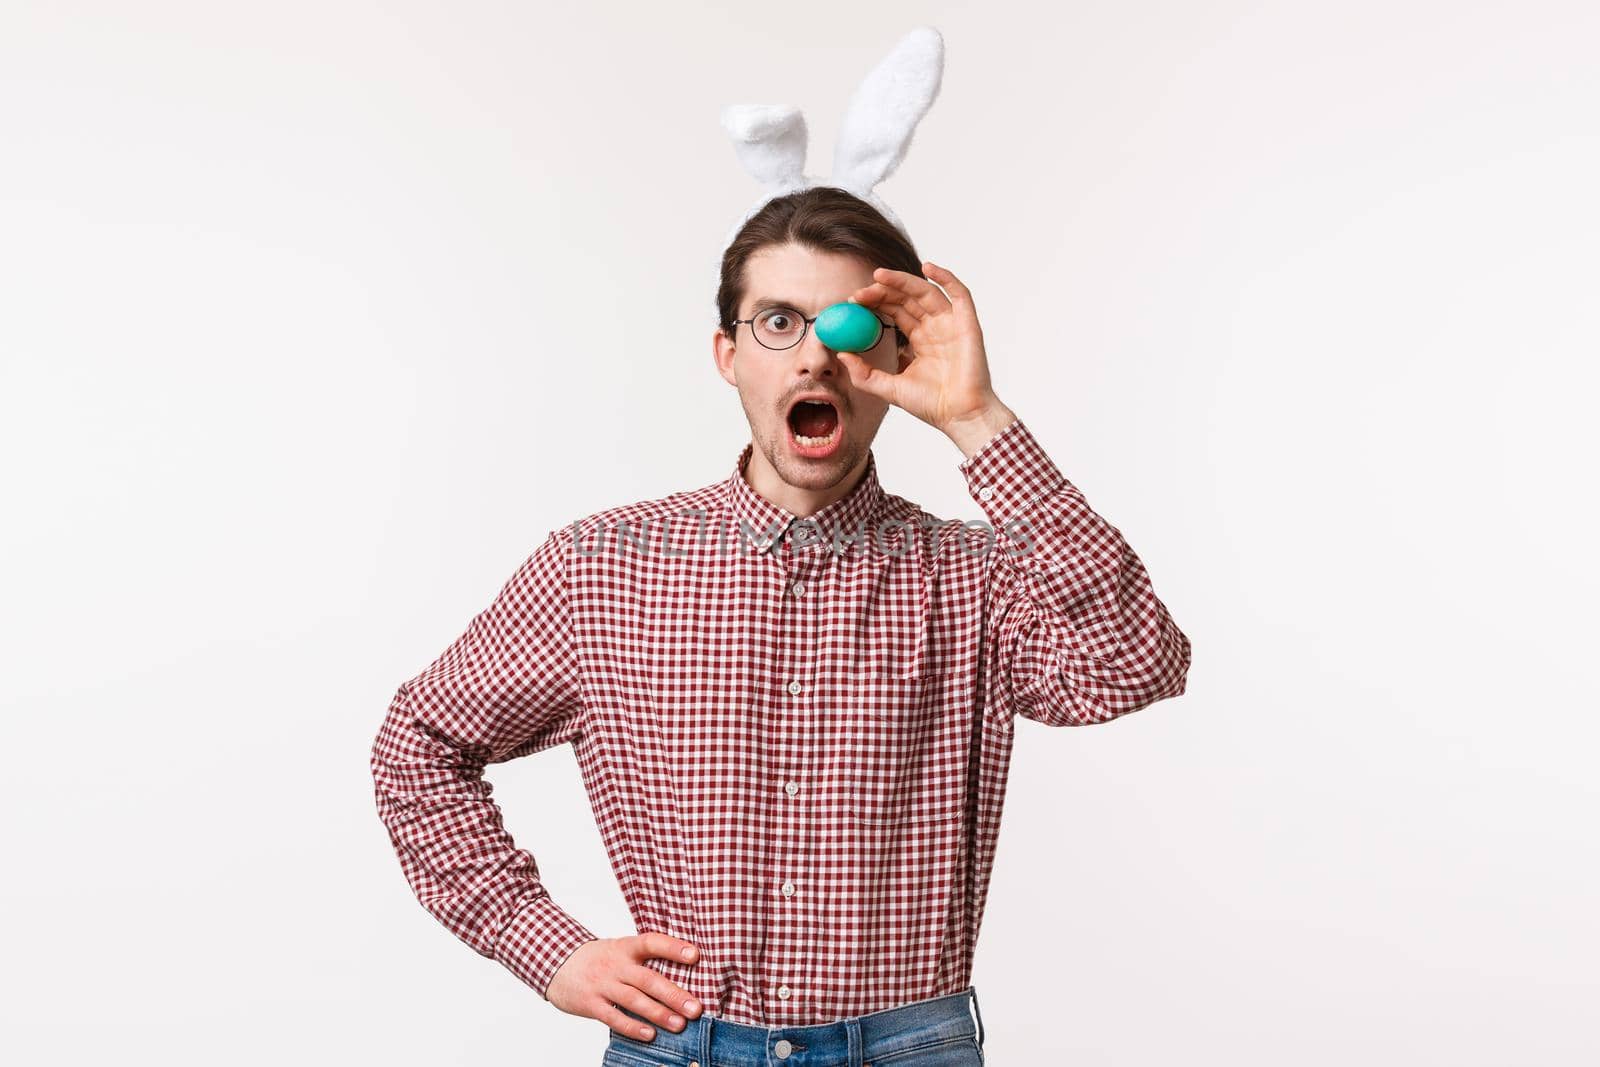 Traditions, religious holidays, celebration concept. Astounded charismatic young bearded man in glasses with cute fake rabbit ears, open mouth surprised, holding painted Easter egg over eye.